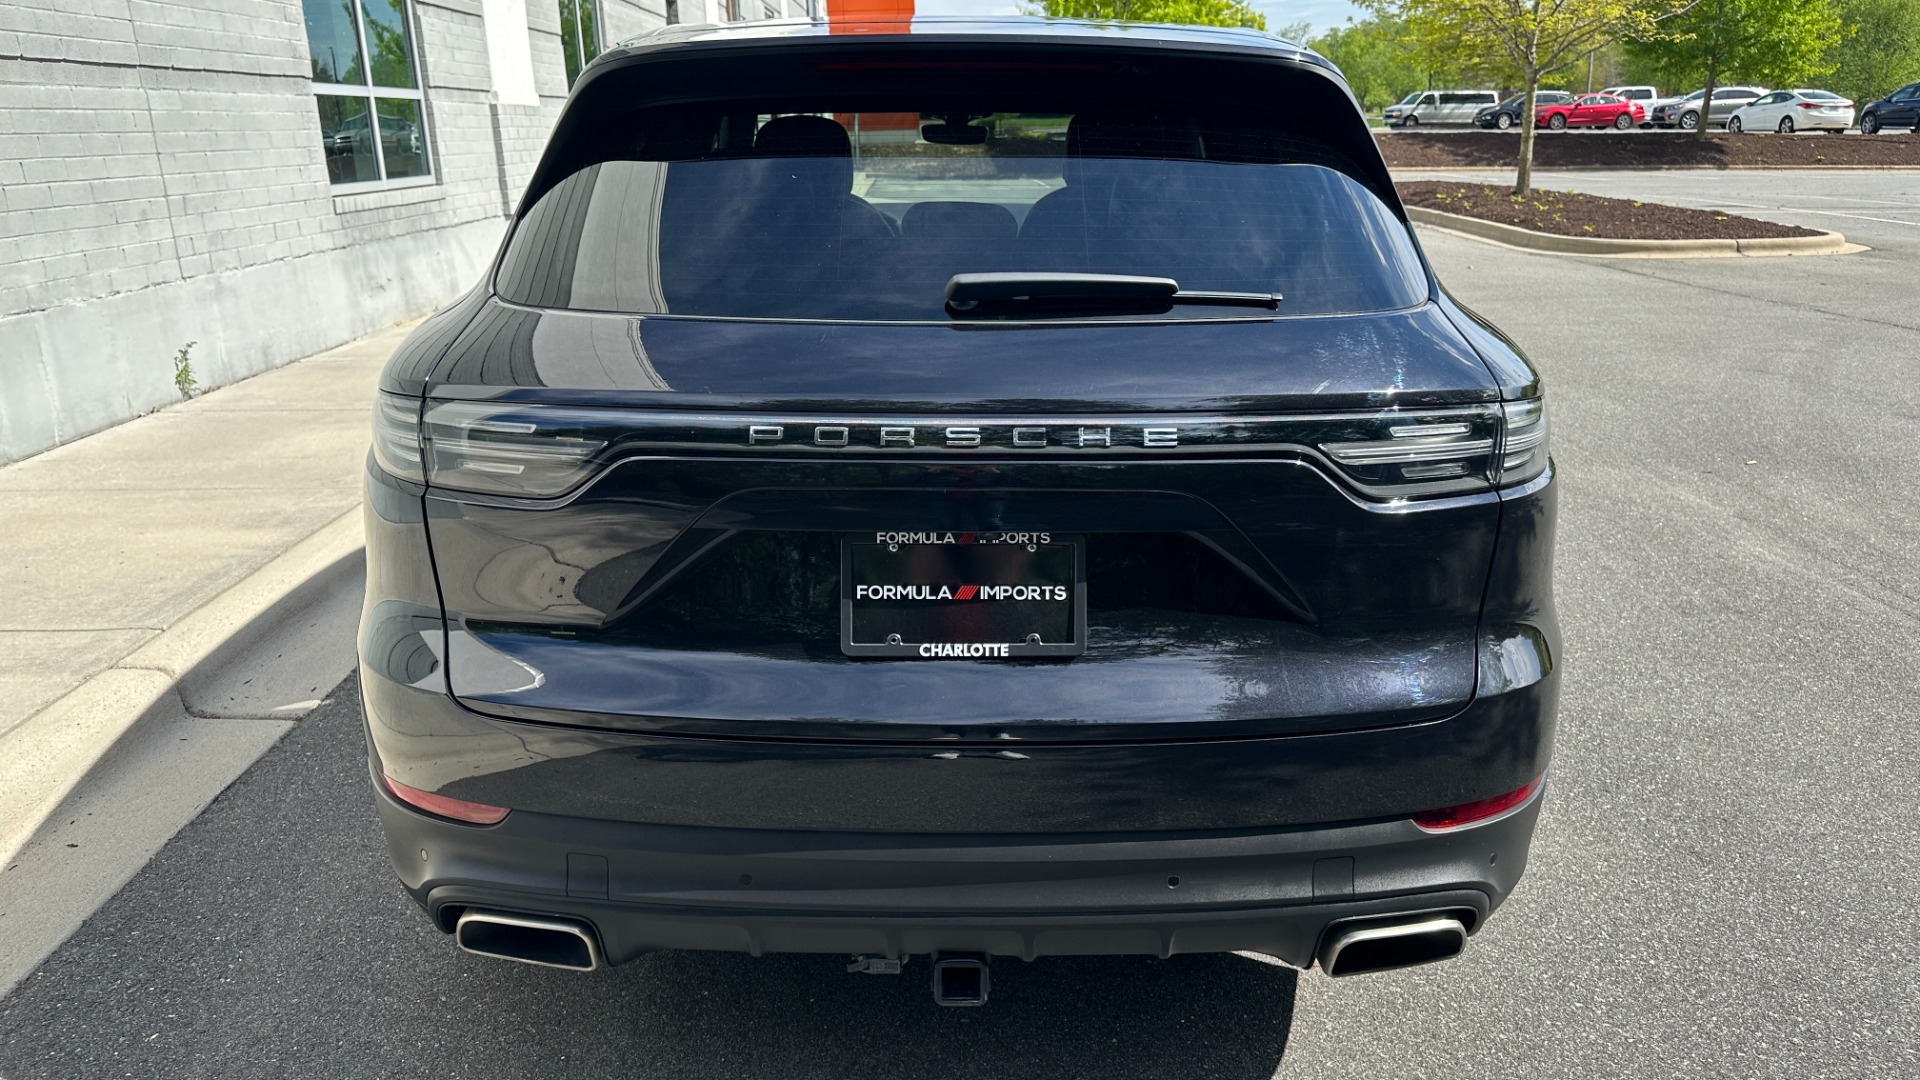 Used 2019 Porsche Cayenne AWD / PREMIUM / TOWING PKG / BOSE AUDIO / GLOSS BLACK TRIM for sale $54,995 at Formula Imports in Charlotte NC 28227 8